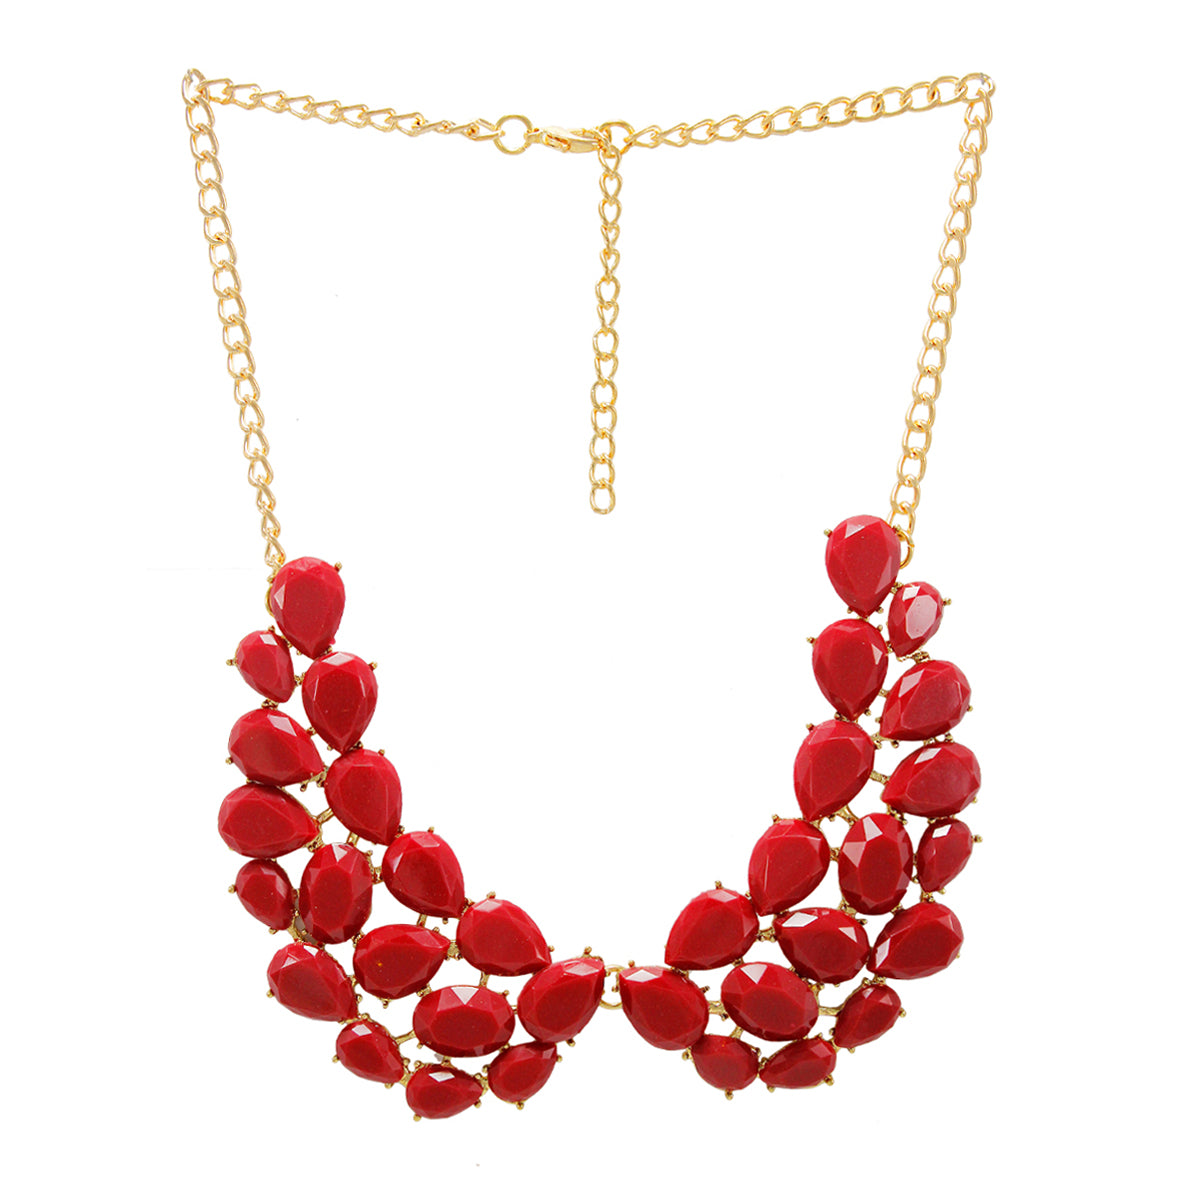 Latest Designer Golden Floral Peacock Necklace with Red Crystal Stones